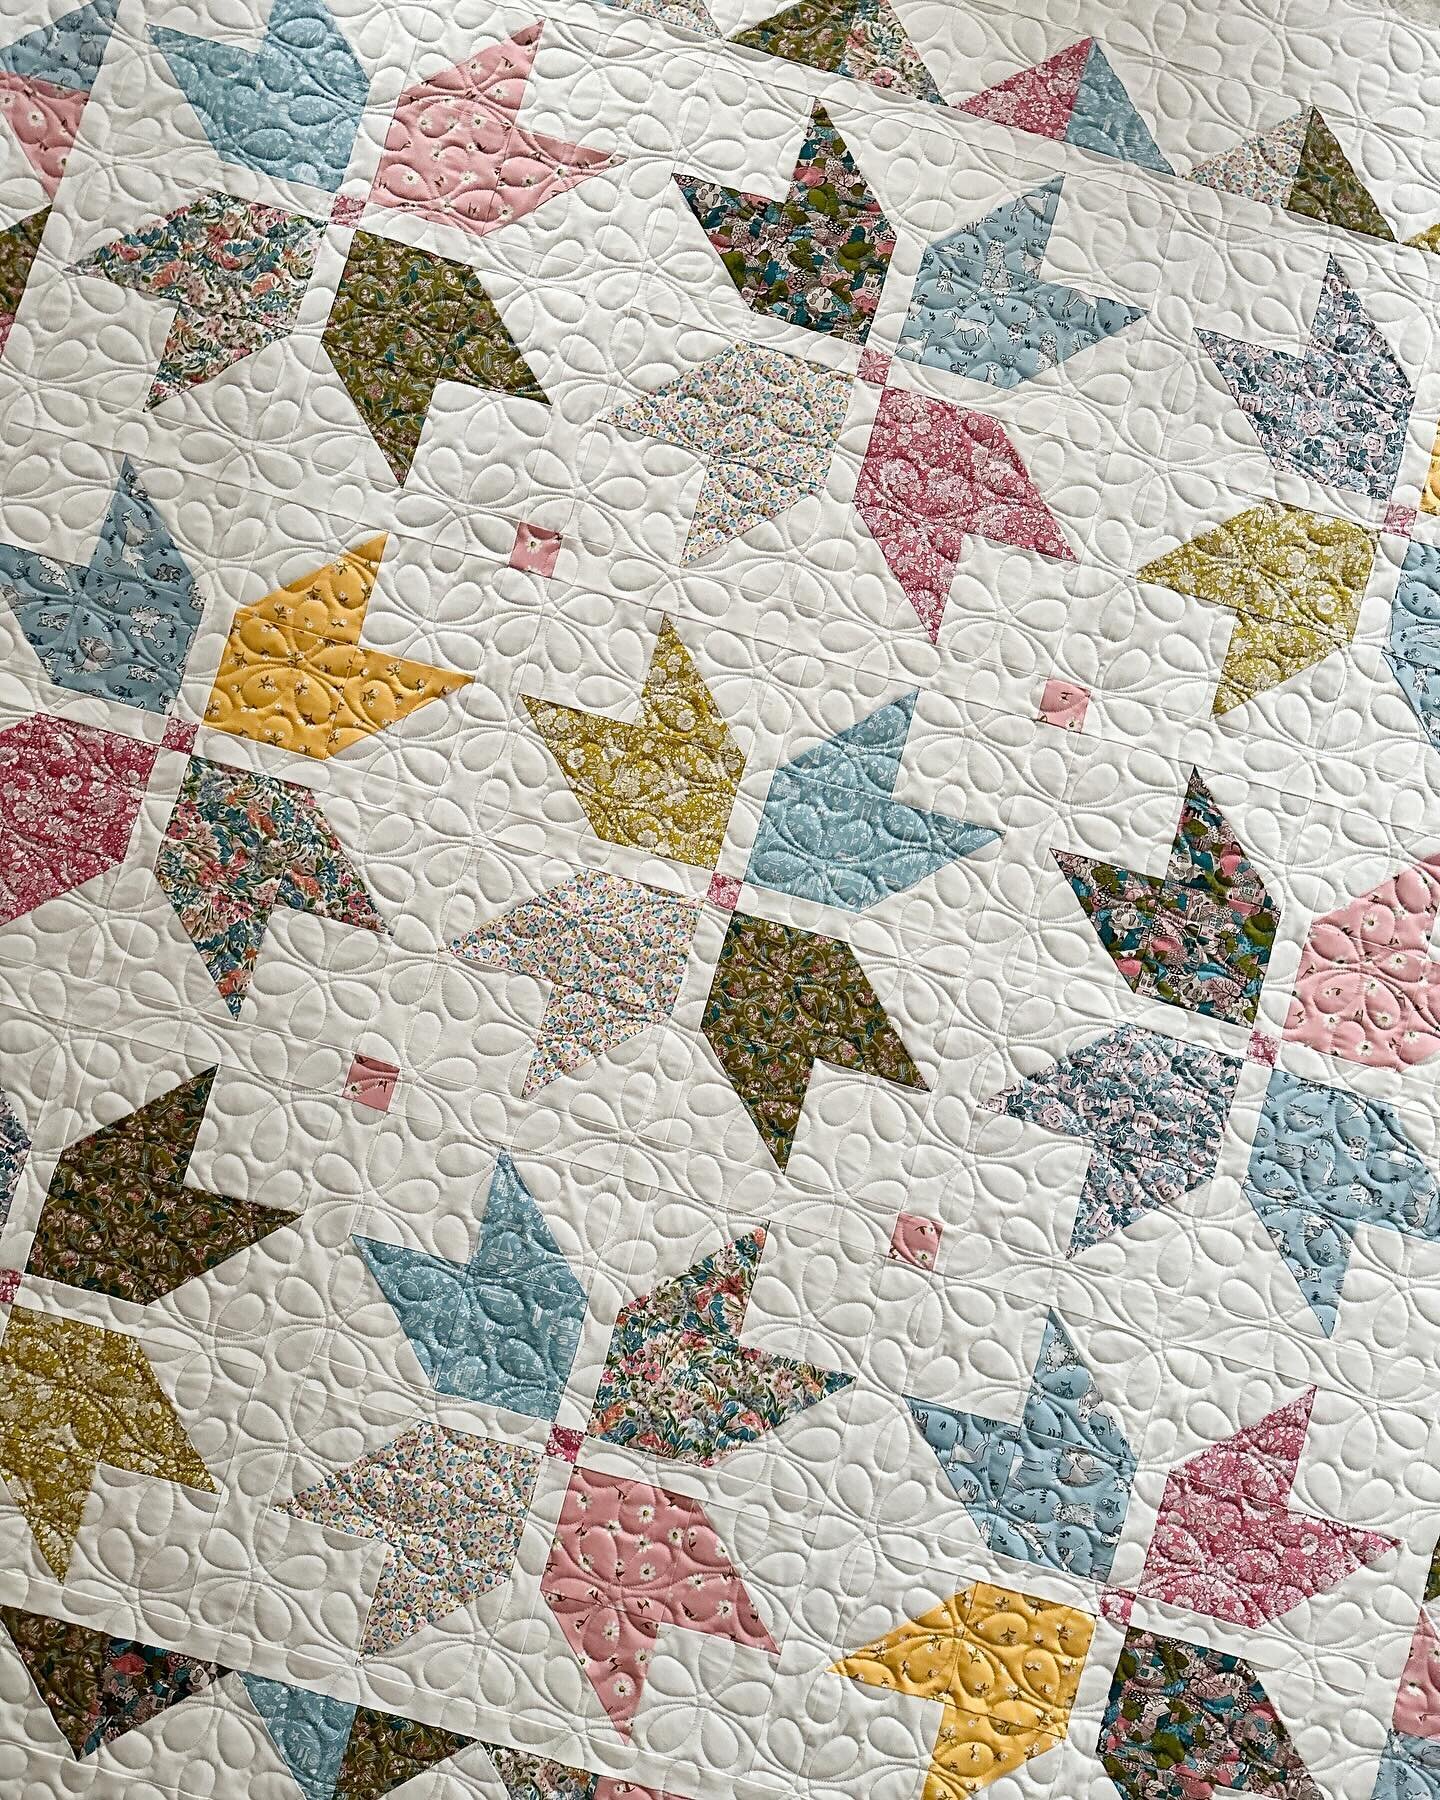 How sweet is this lovely quilt!! LeAnn always does an excellent job.

This lovely Quarter Star pattern is an exclusive quilt that Amy Smart from @diaryofaquilter did with @mygirlfriendsquiltshoppe as part of their Designer Series.  I&rsquo;ve linked 